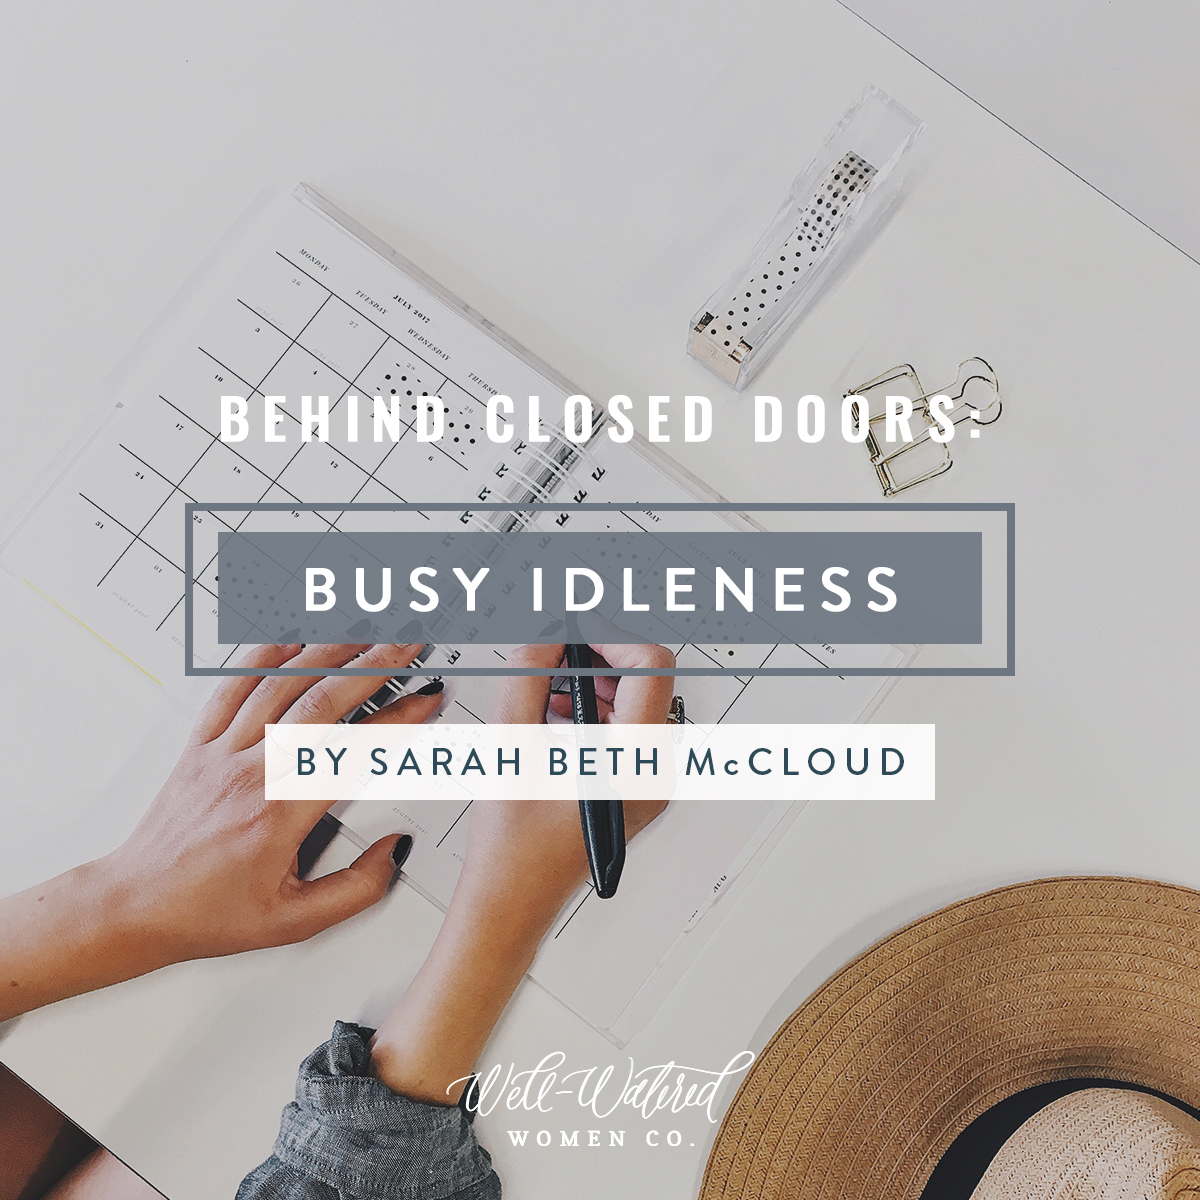 The more I dug into Scripture to see what God has to say about it, the more aware I became of this: I deeply struggle with idleness, and a lot of unaware sisters probably do too.